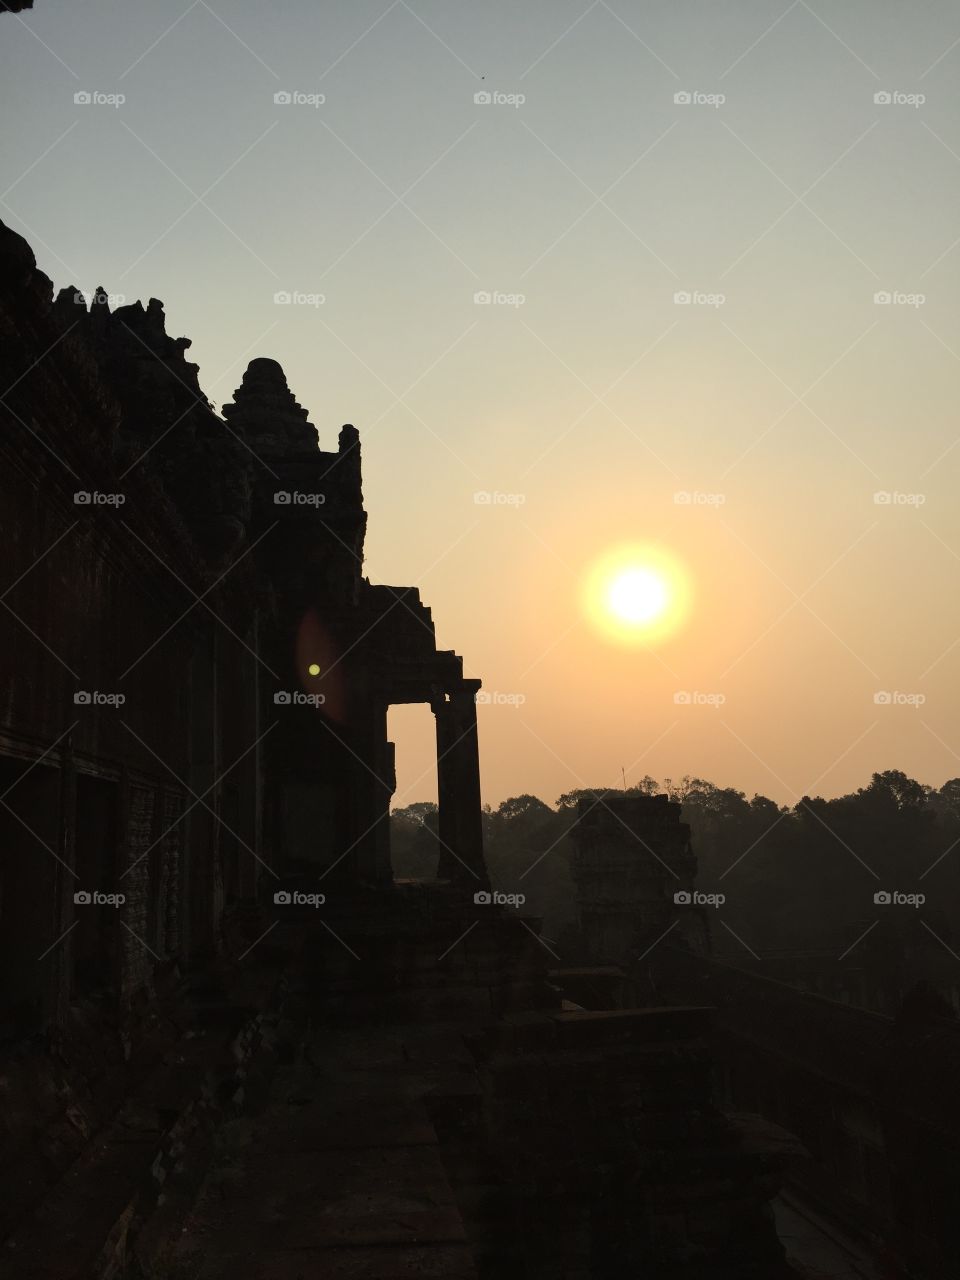 Sunrise at the Angkor Wat temple in Cambodia. Silhouette picture of the architecture and the sun in the background. 